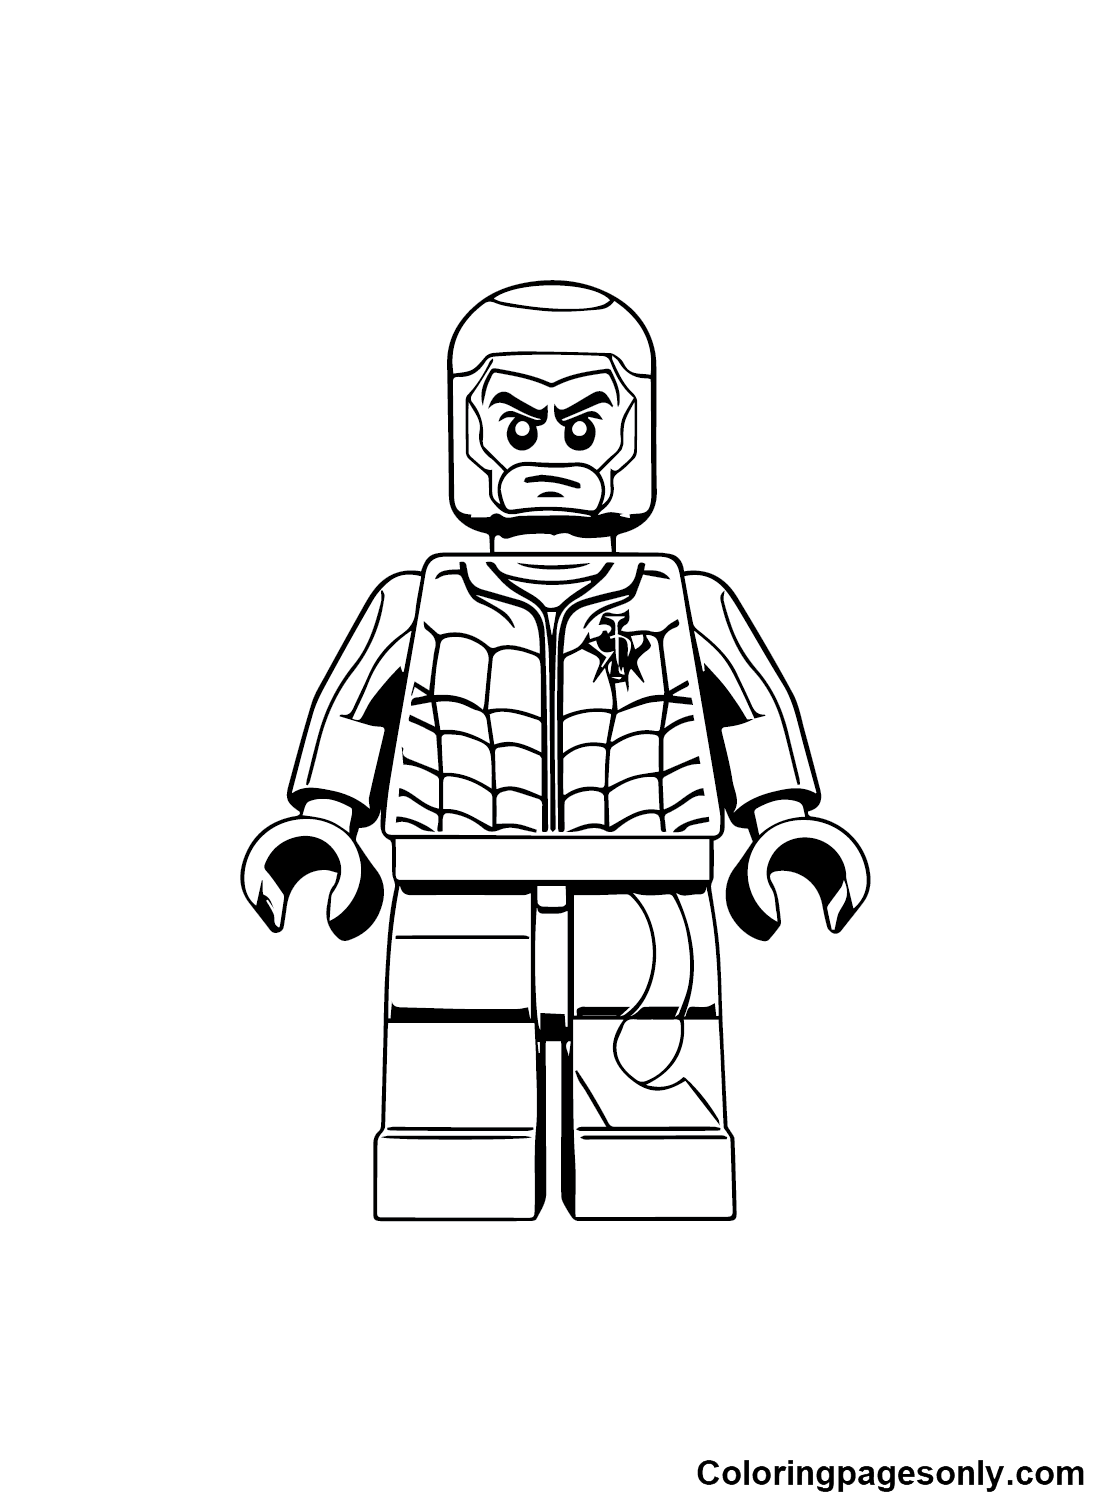 Spiderman Lego Coloring Pages